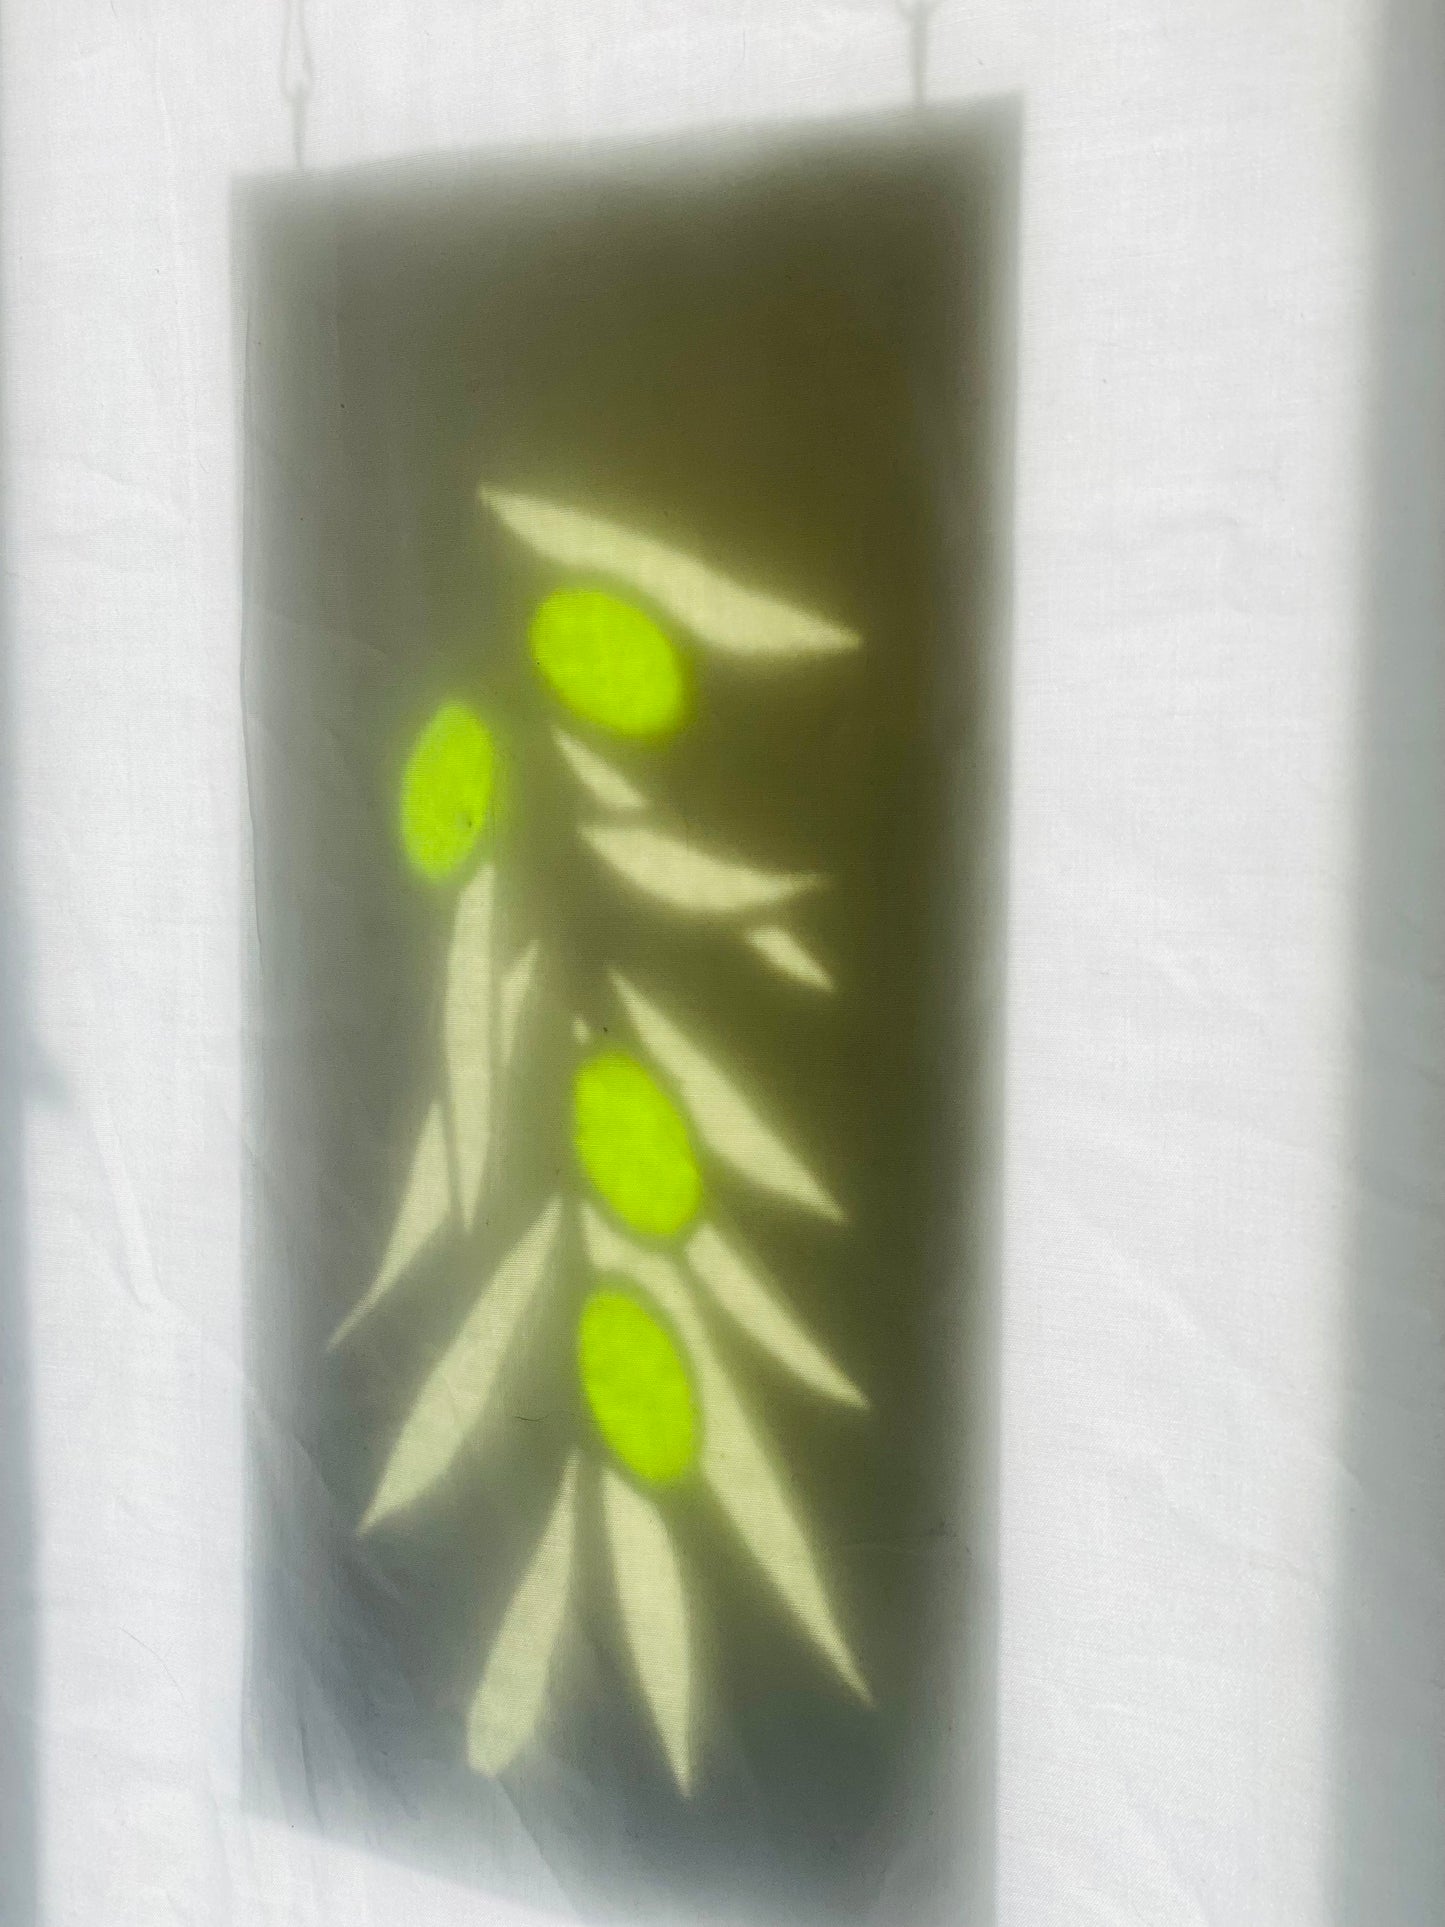 Olive Branch Stained Glass Panel